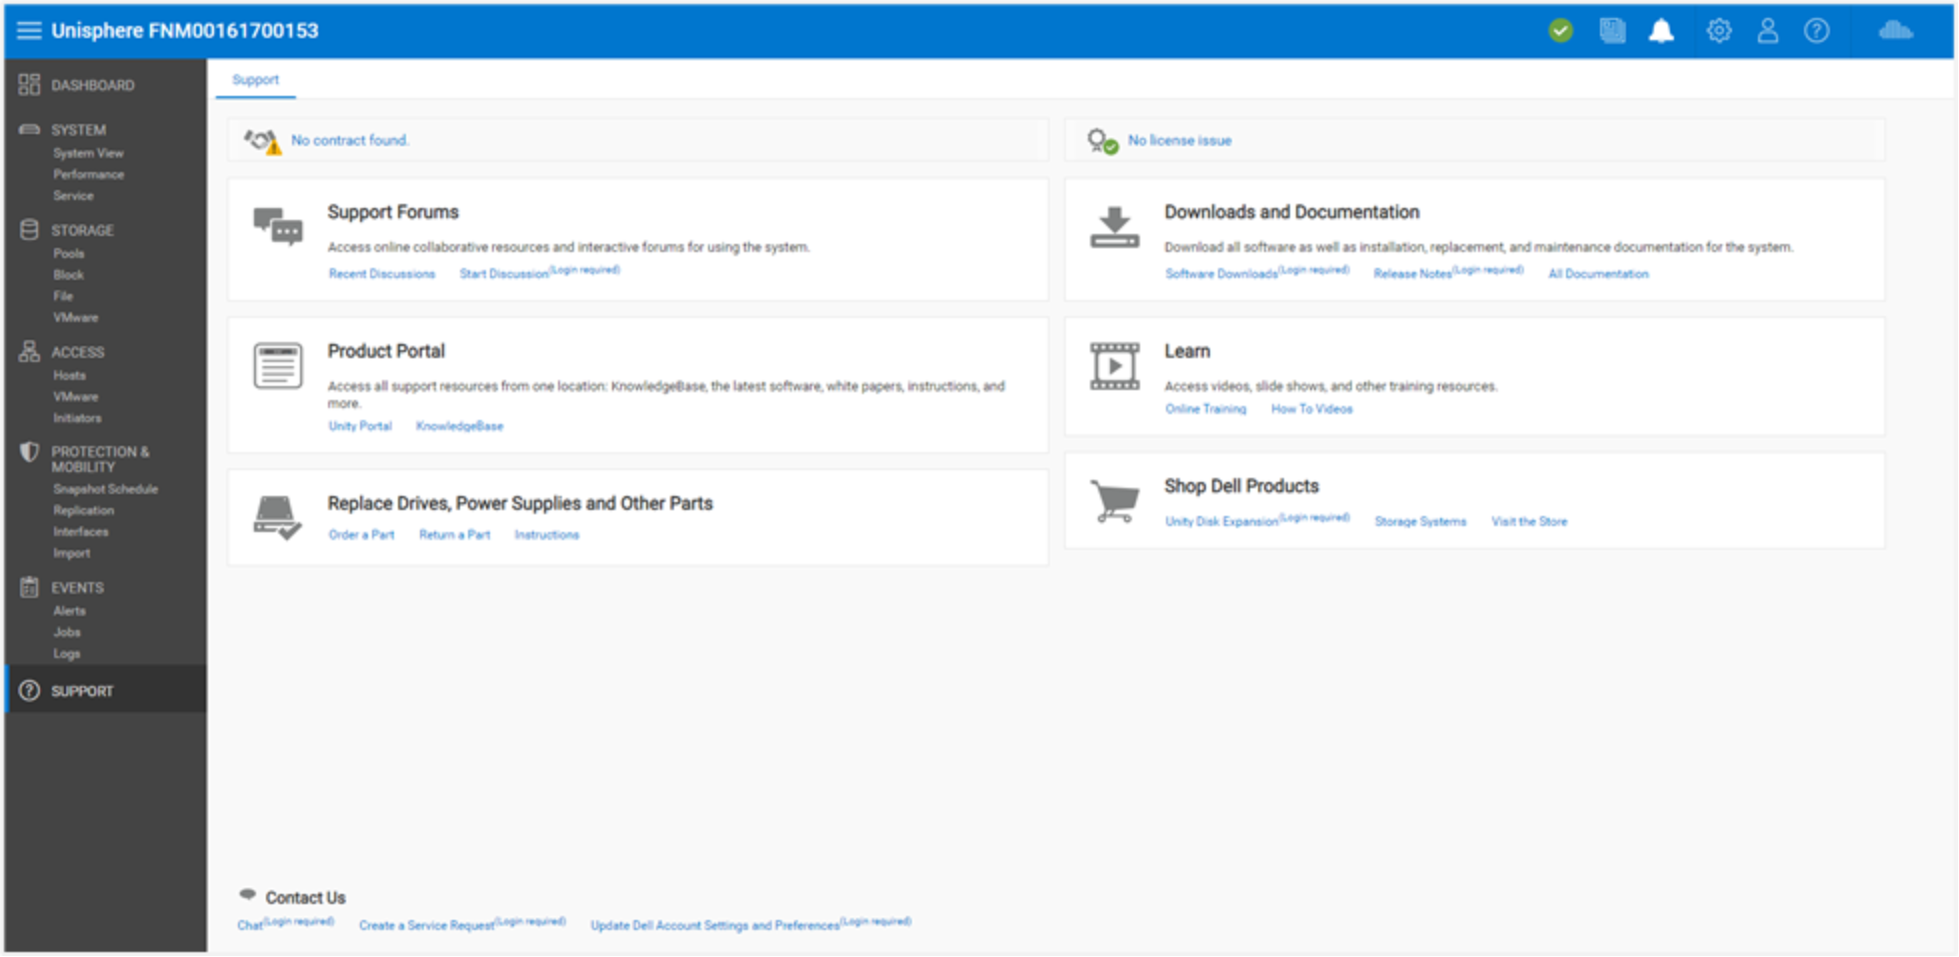 Unisphere's Support page for learning resources and assistance for the Dell Unity storage system.